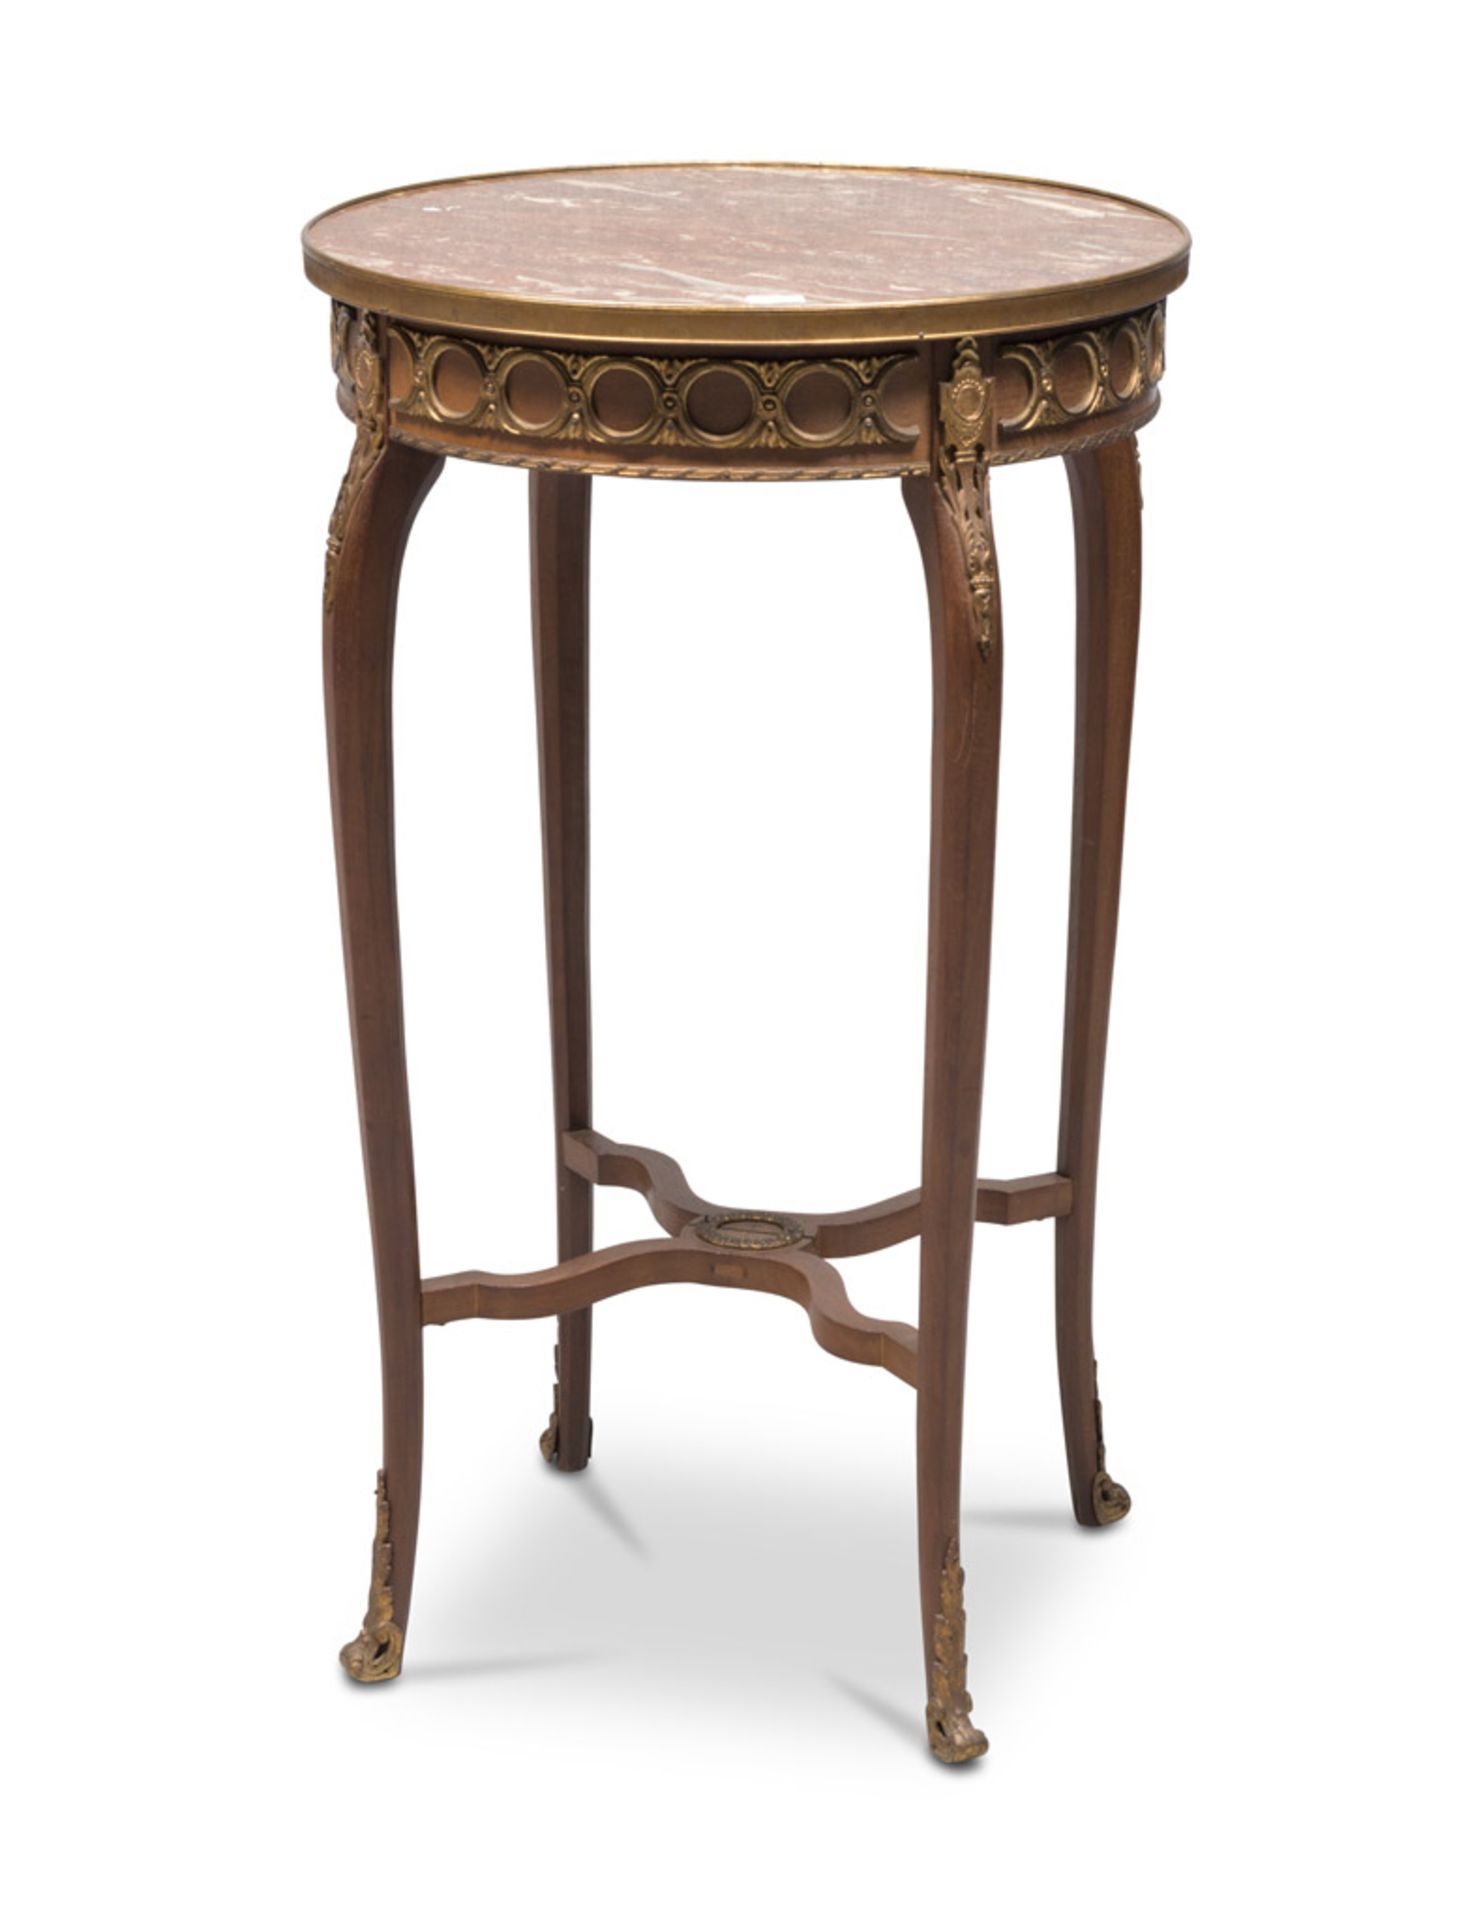 SMALL MAHOGANY TABLE, FRANCE 19TH CENTURY round top in red breach, four cabriole legs. Beautiful